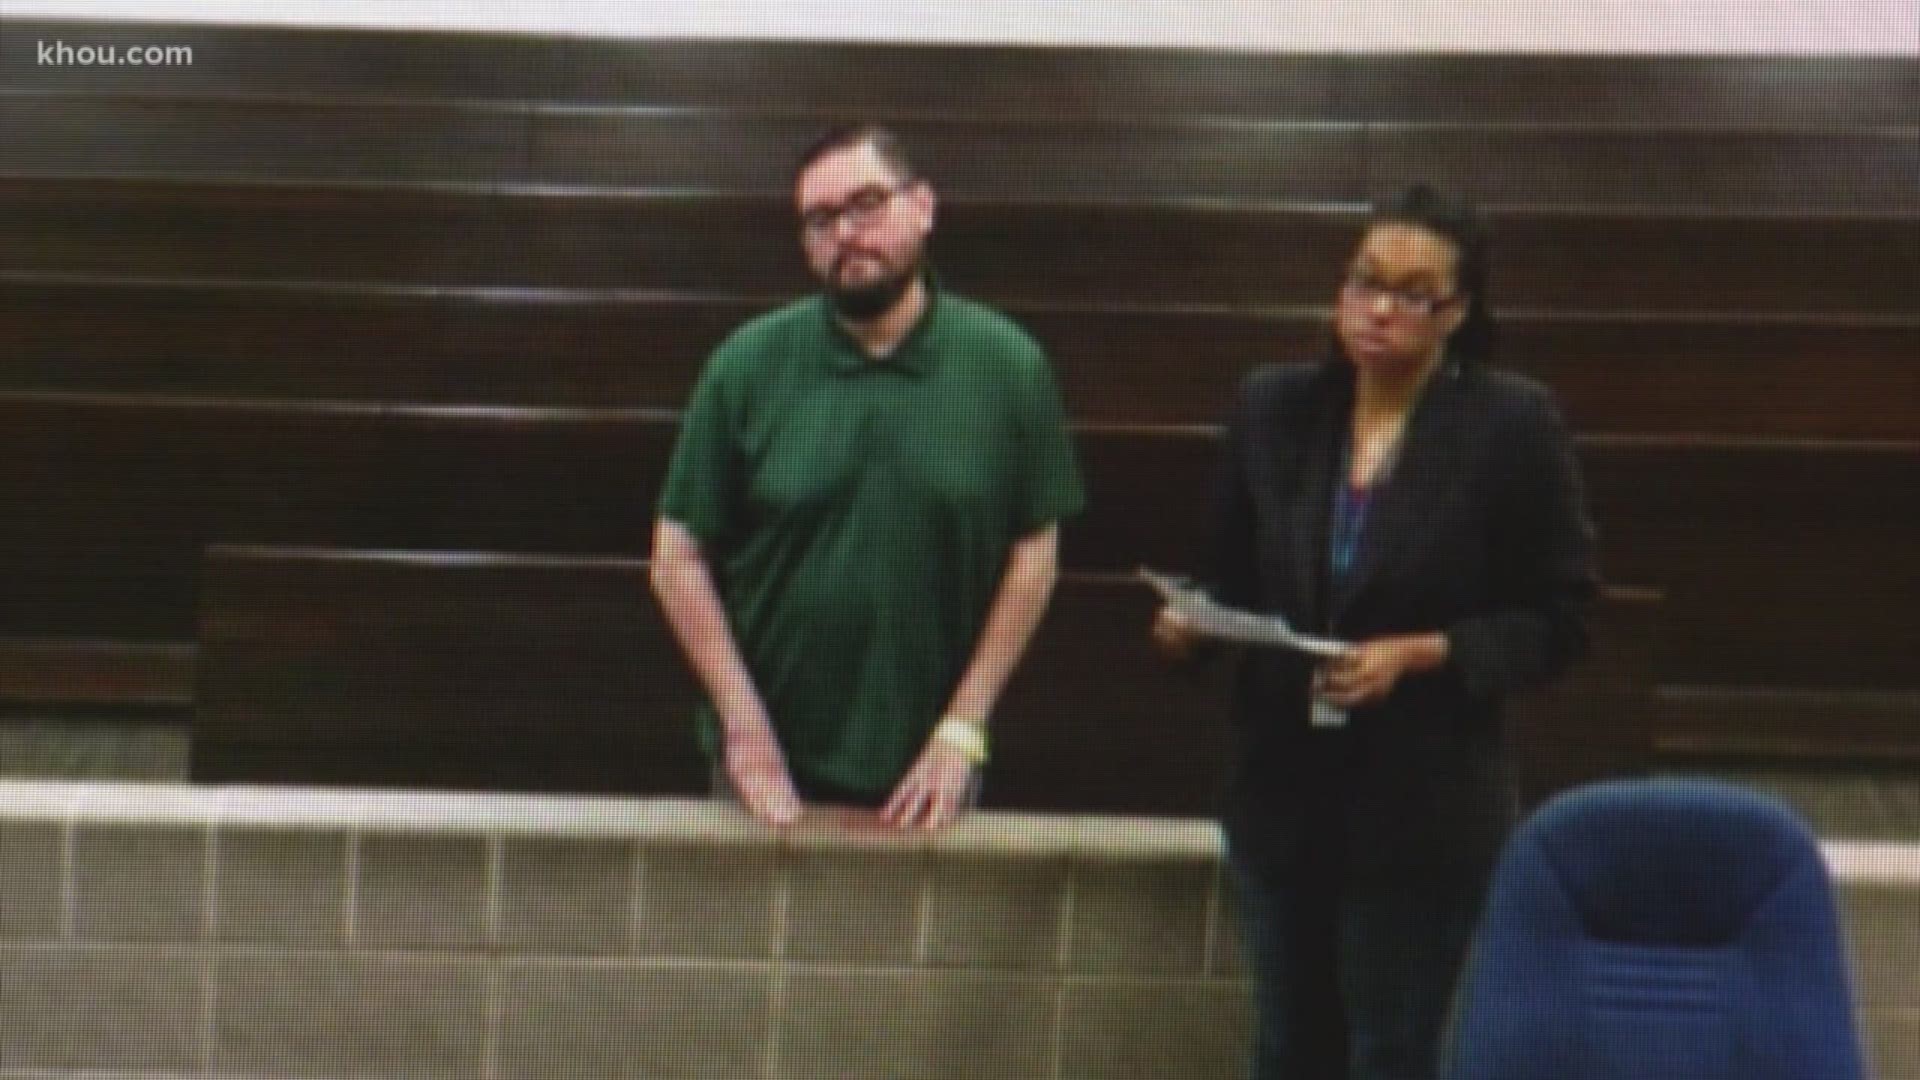 Bradley, a Houston ISD employee, is in jail on $30K bond. According to court records, the incident happened in Feb. 2019 at Foster Elementary School.